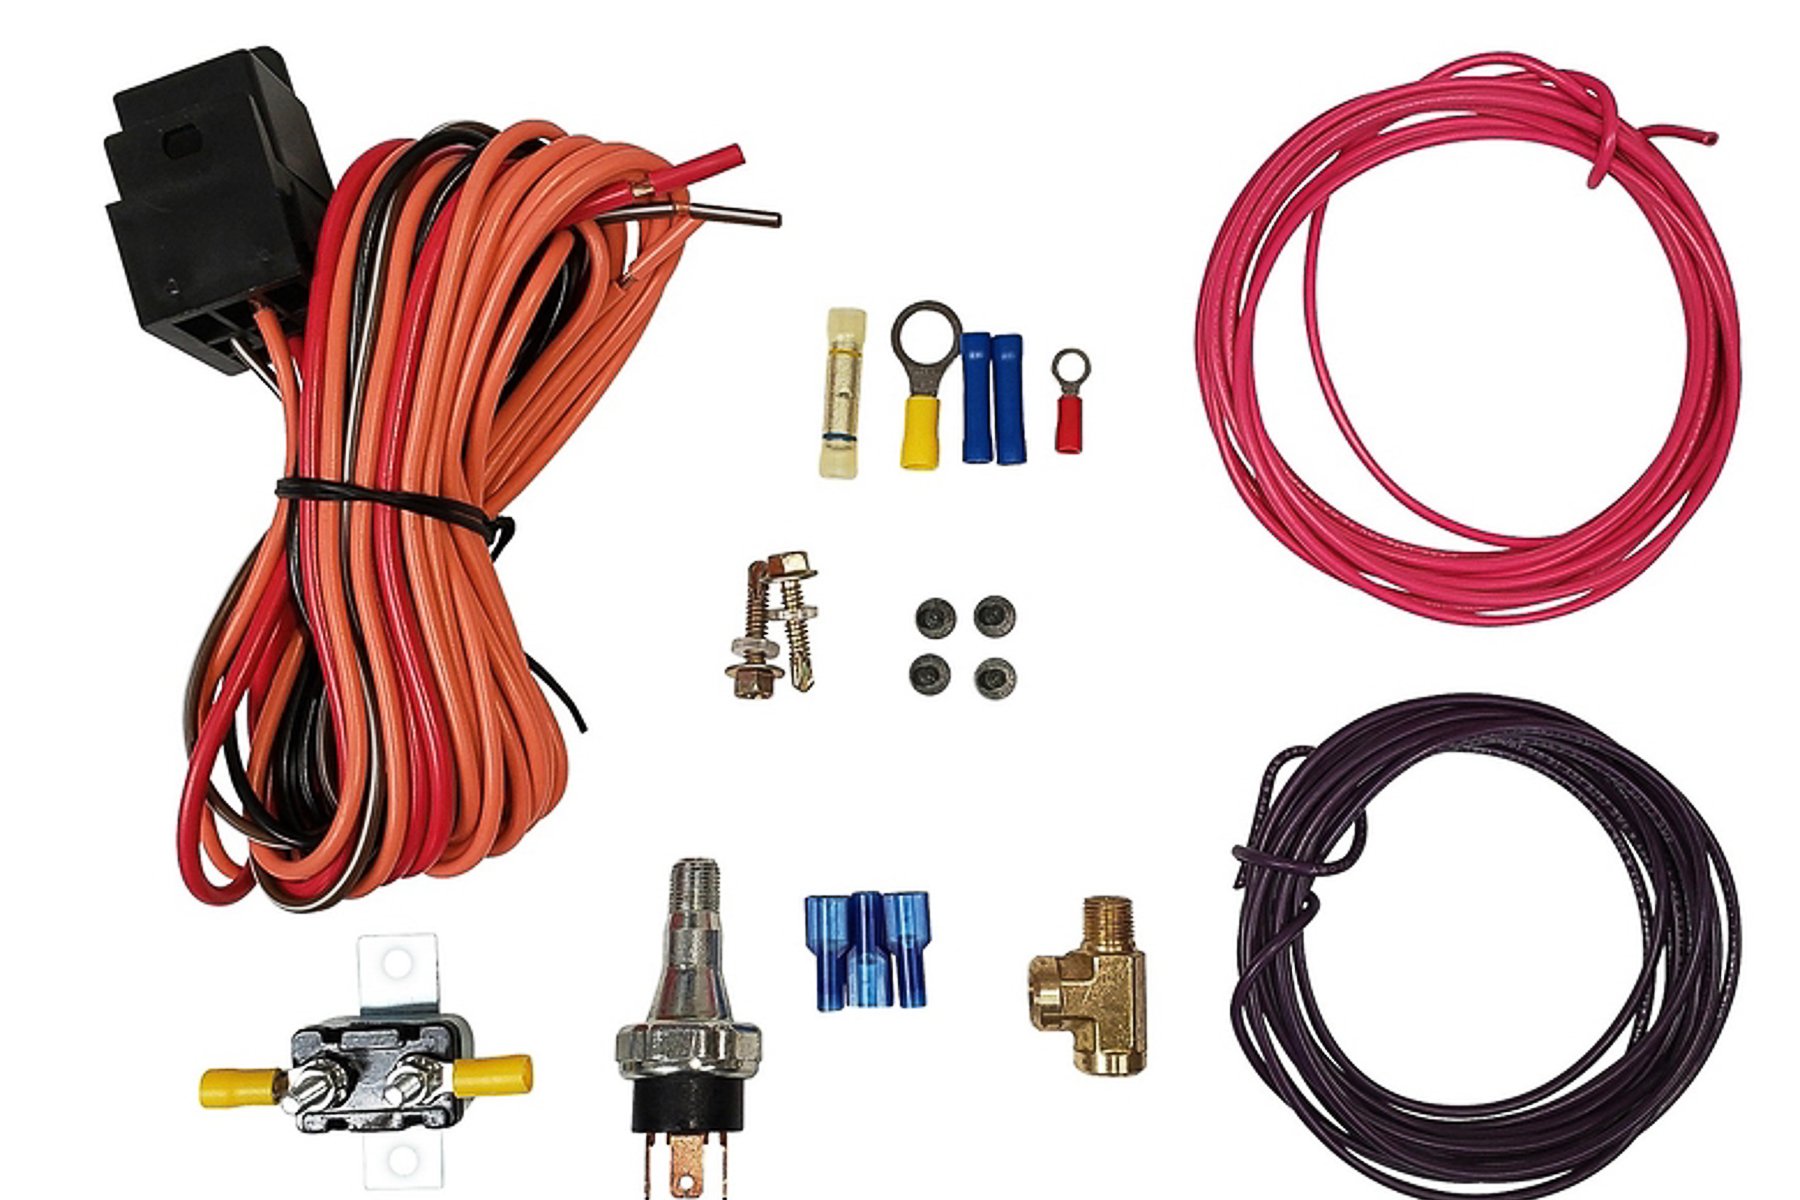 This TANKS Inc. Wiring Kit Will Improve Your Fuel System’s Safety